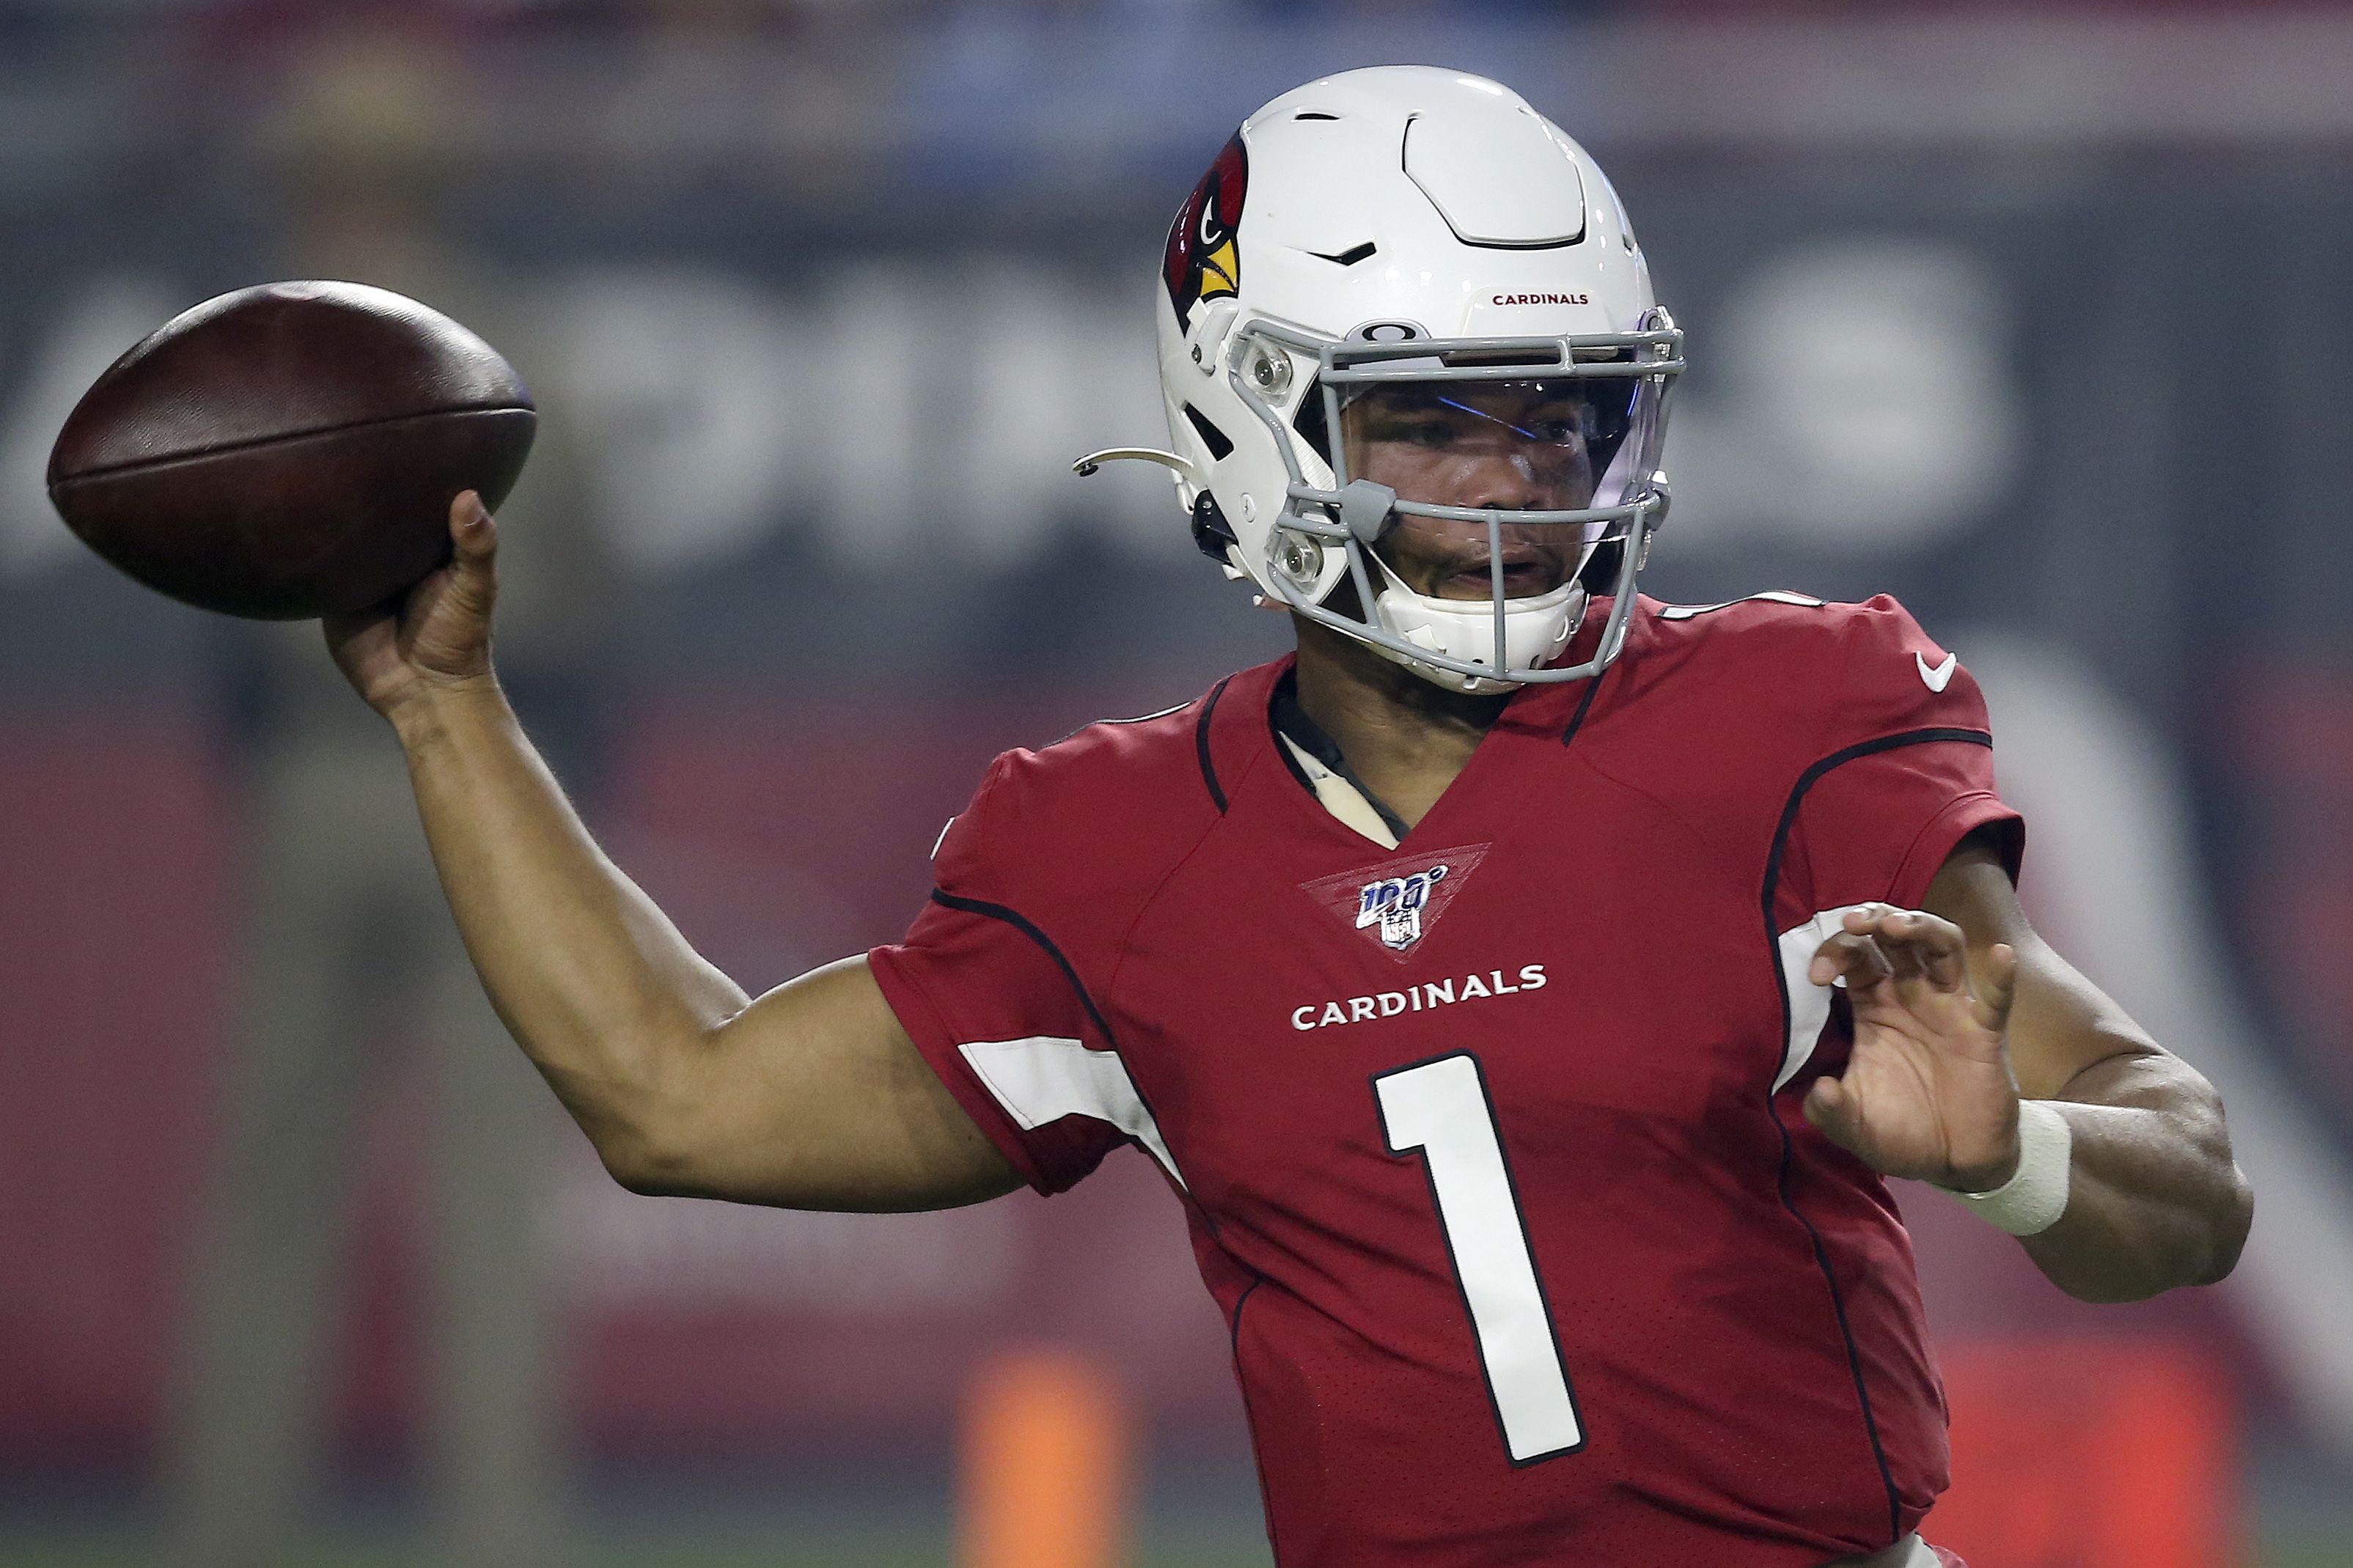 Lions sign former Cardinals QB Chad Kanoff to practice squad